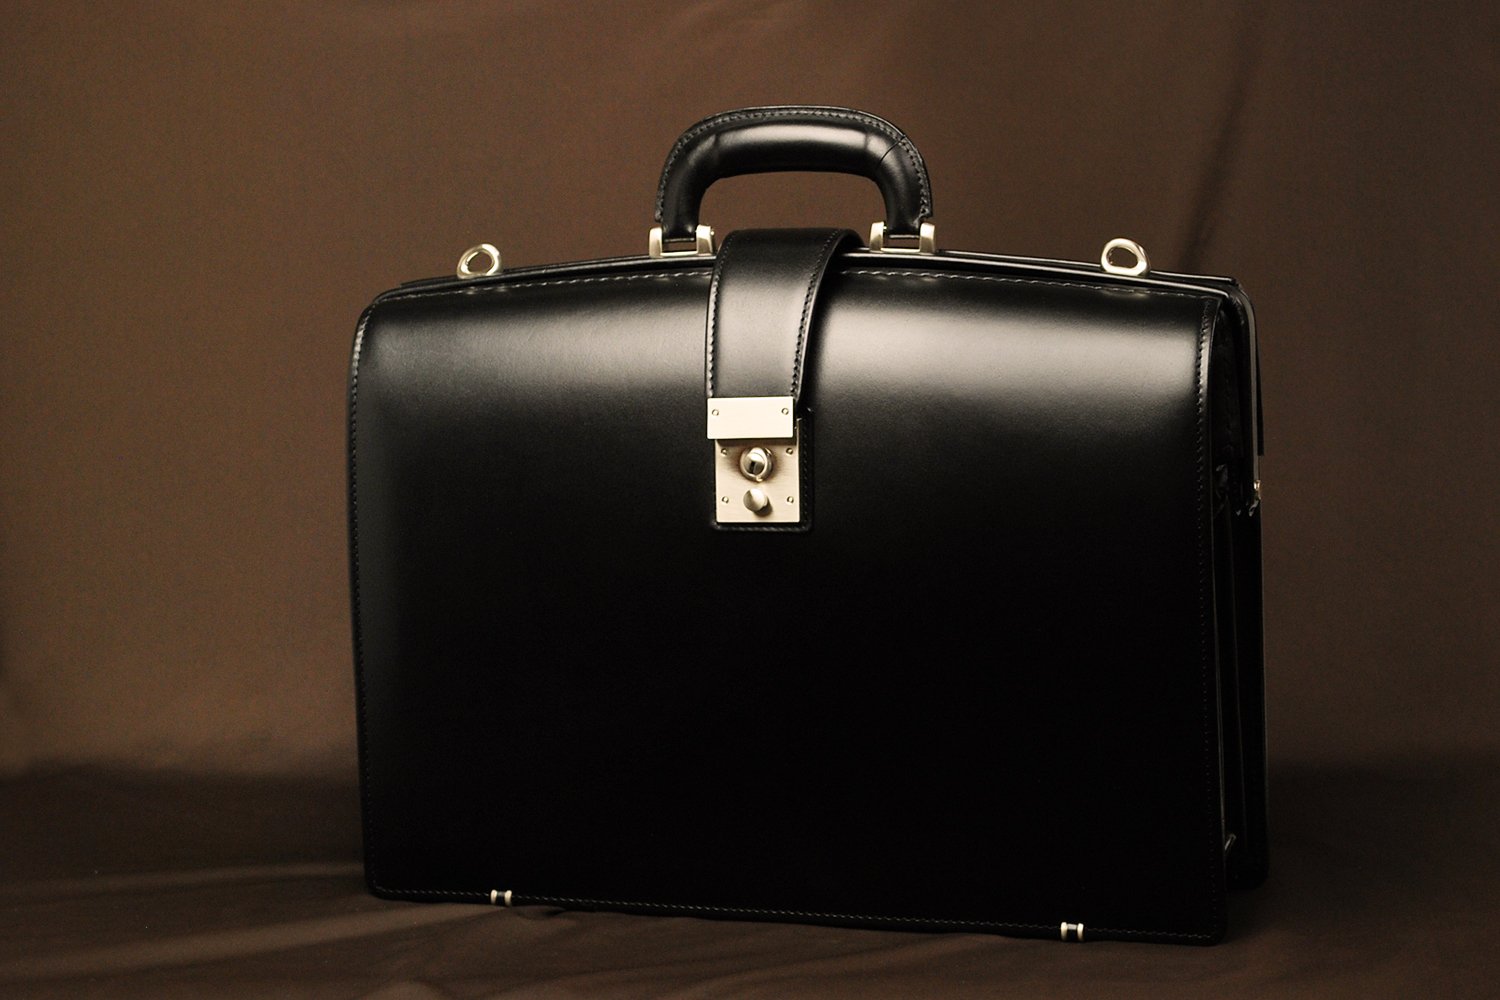 Luggage AOKI 1894 / Genius A crystal of Japanese craftsmanship. An elegant Dulles bag made of heavy leather leather